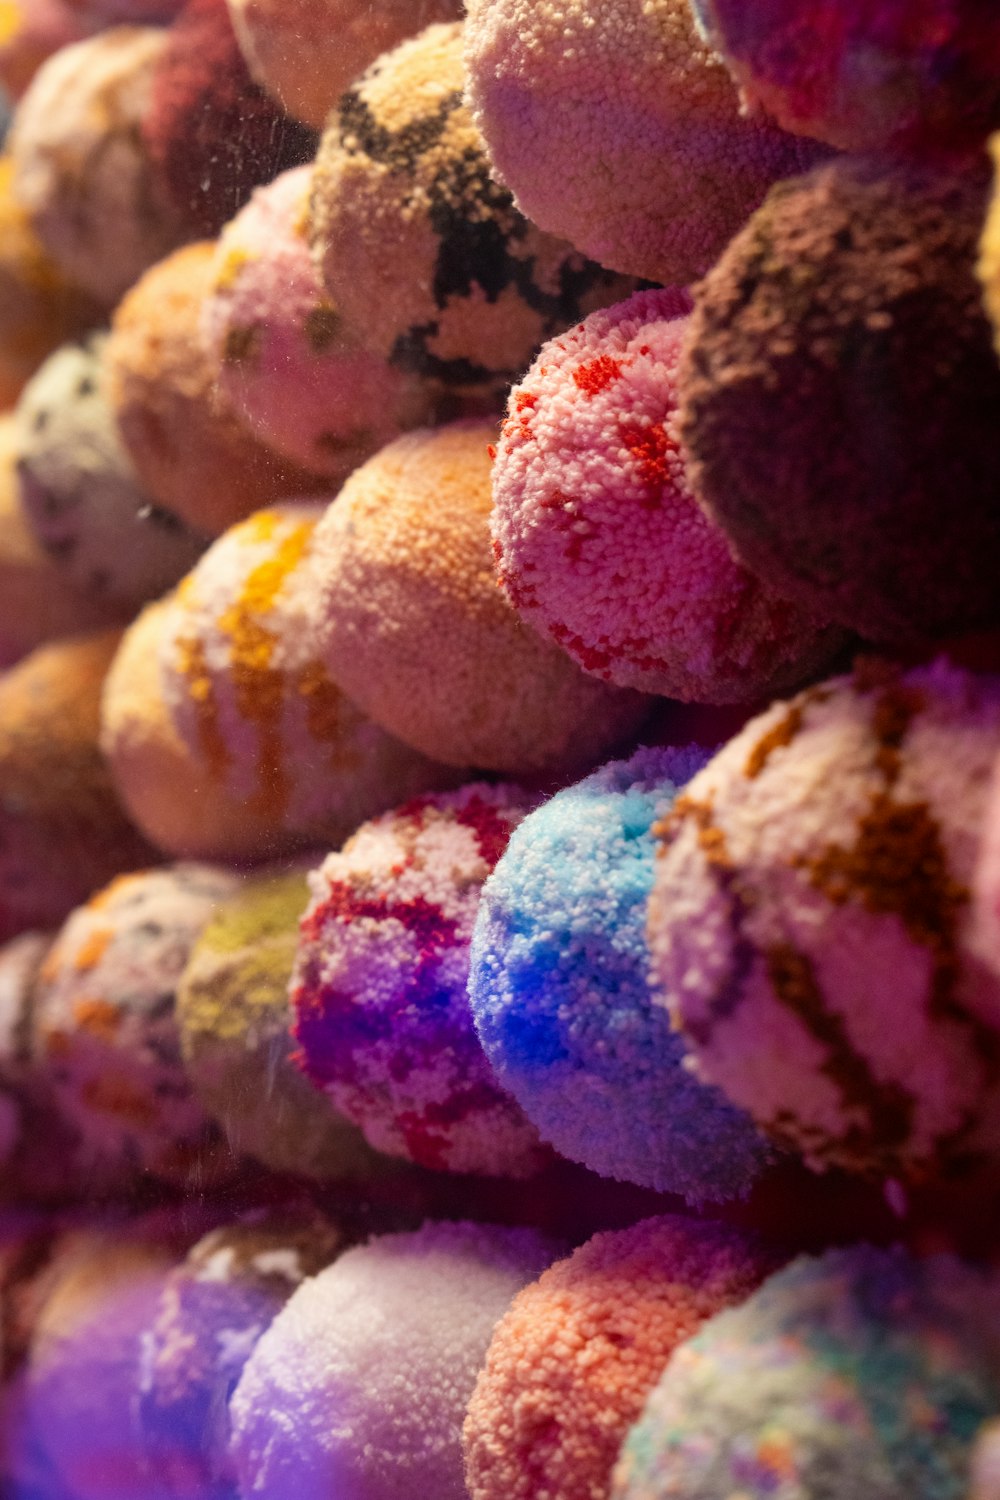 a bunch of doughnuts that are covered in colored powder